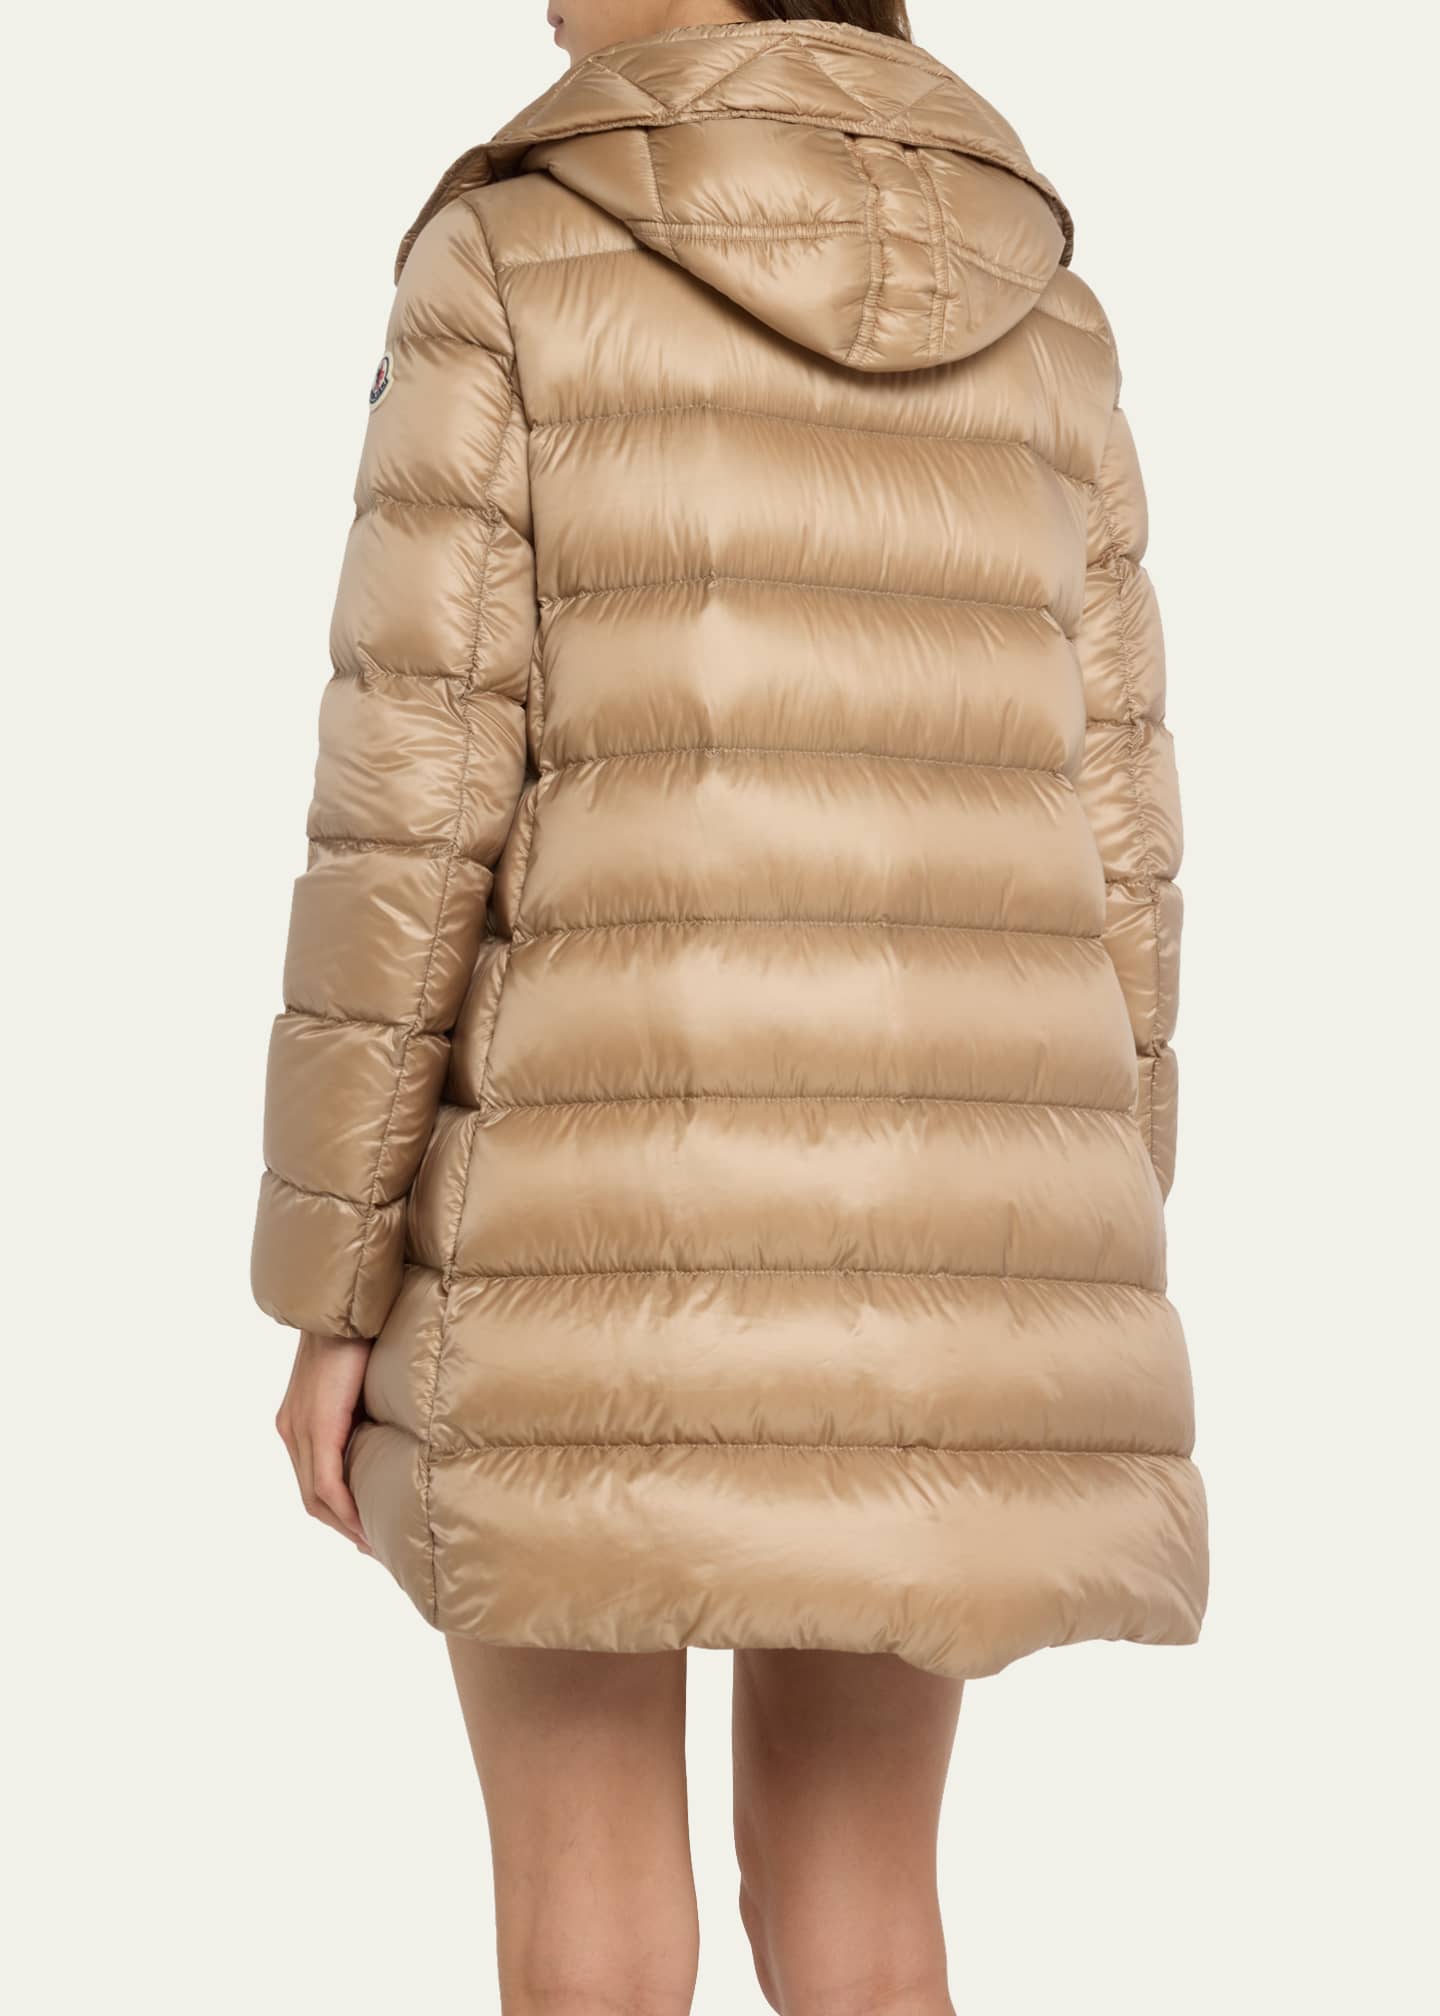 Moncler Suyen Down Quilted Nylon Hooded Parka - Bergdorf Goodman